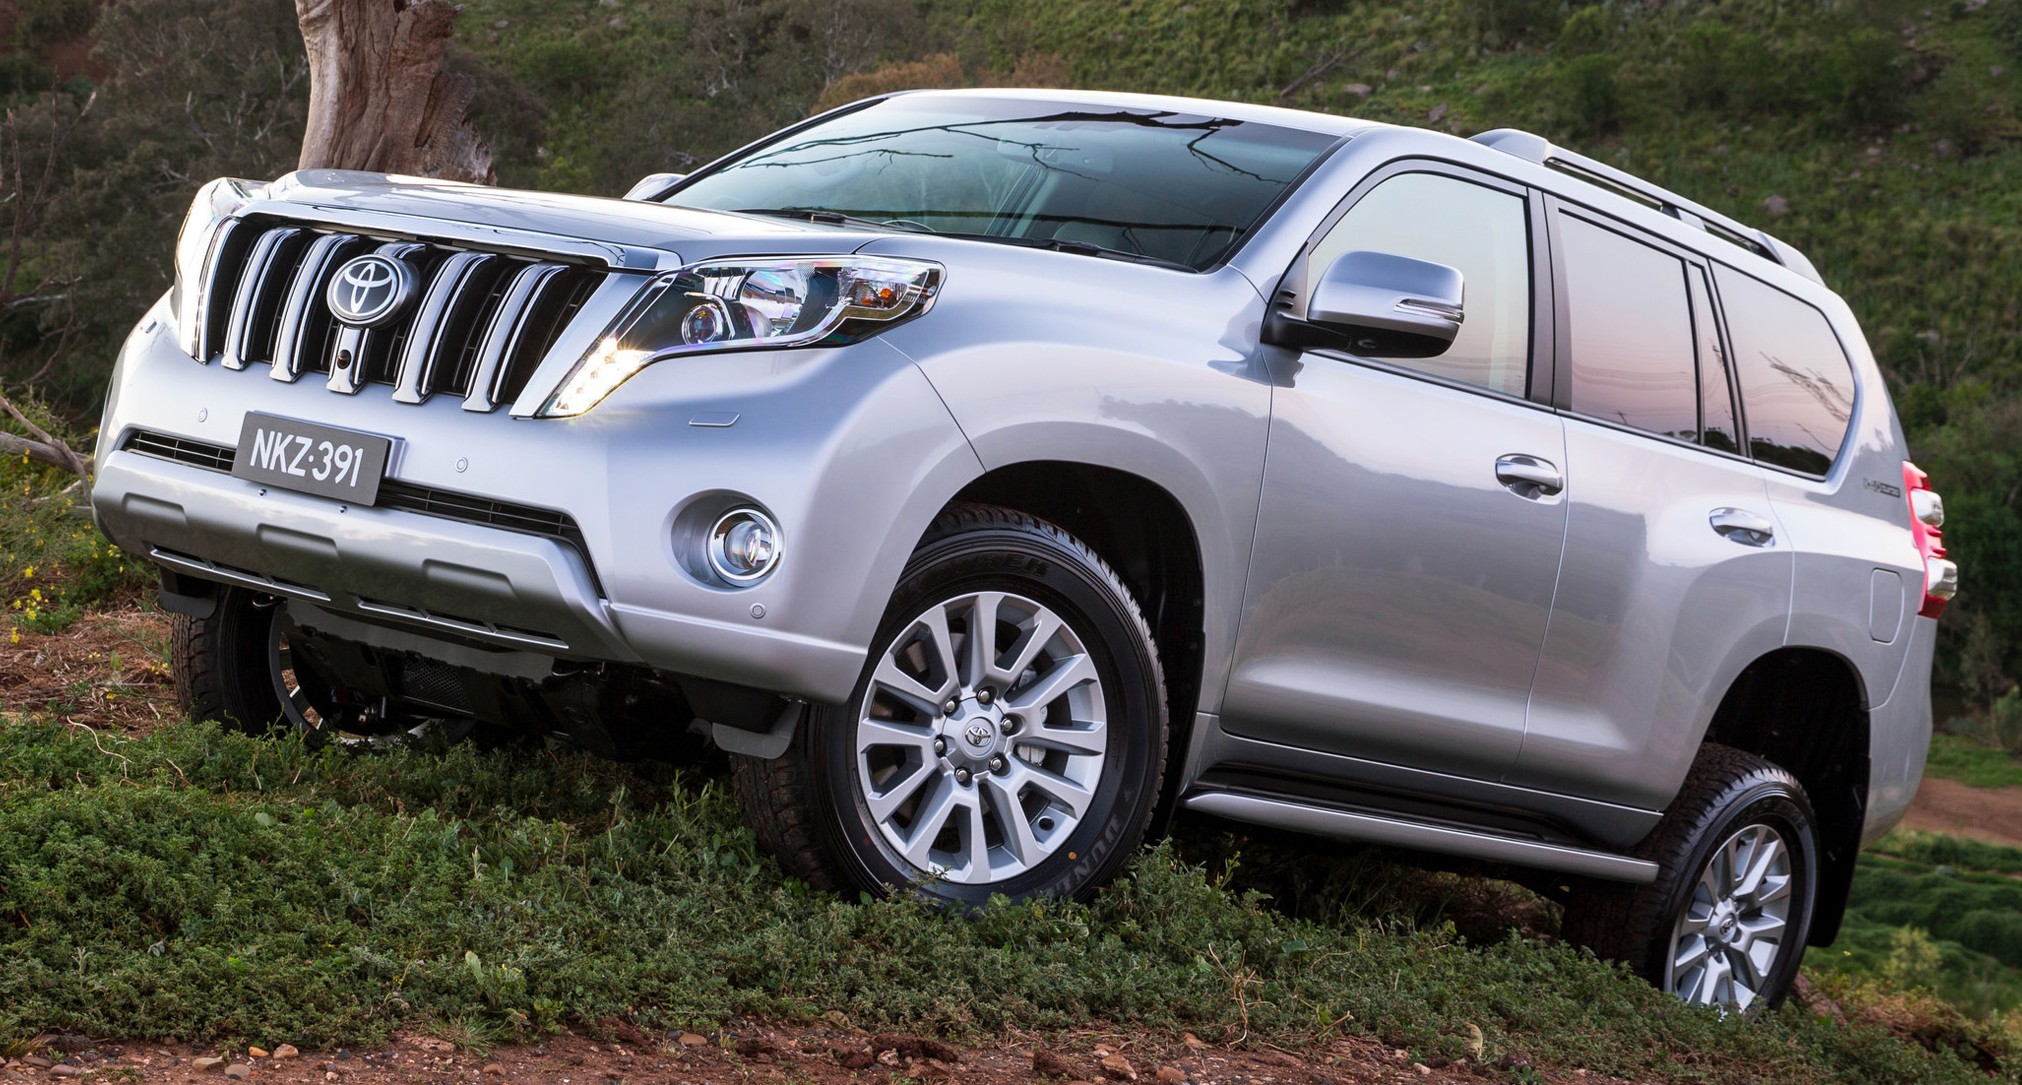 What are some features of a Toyota Land Cruiser?